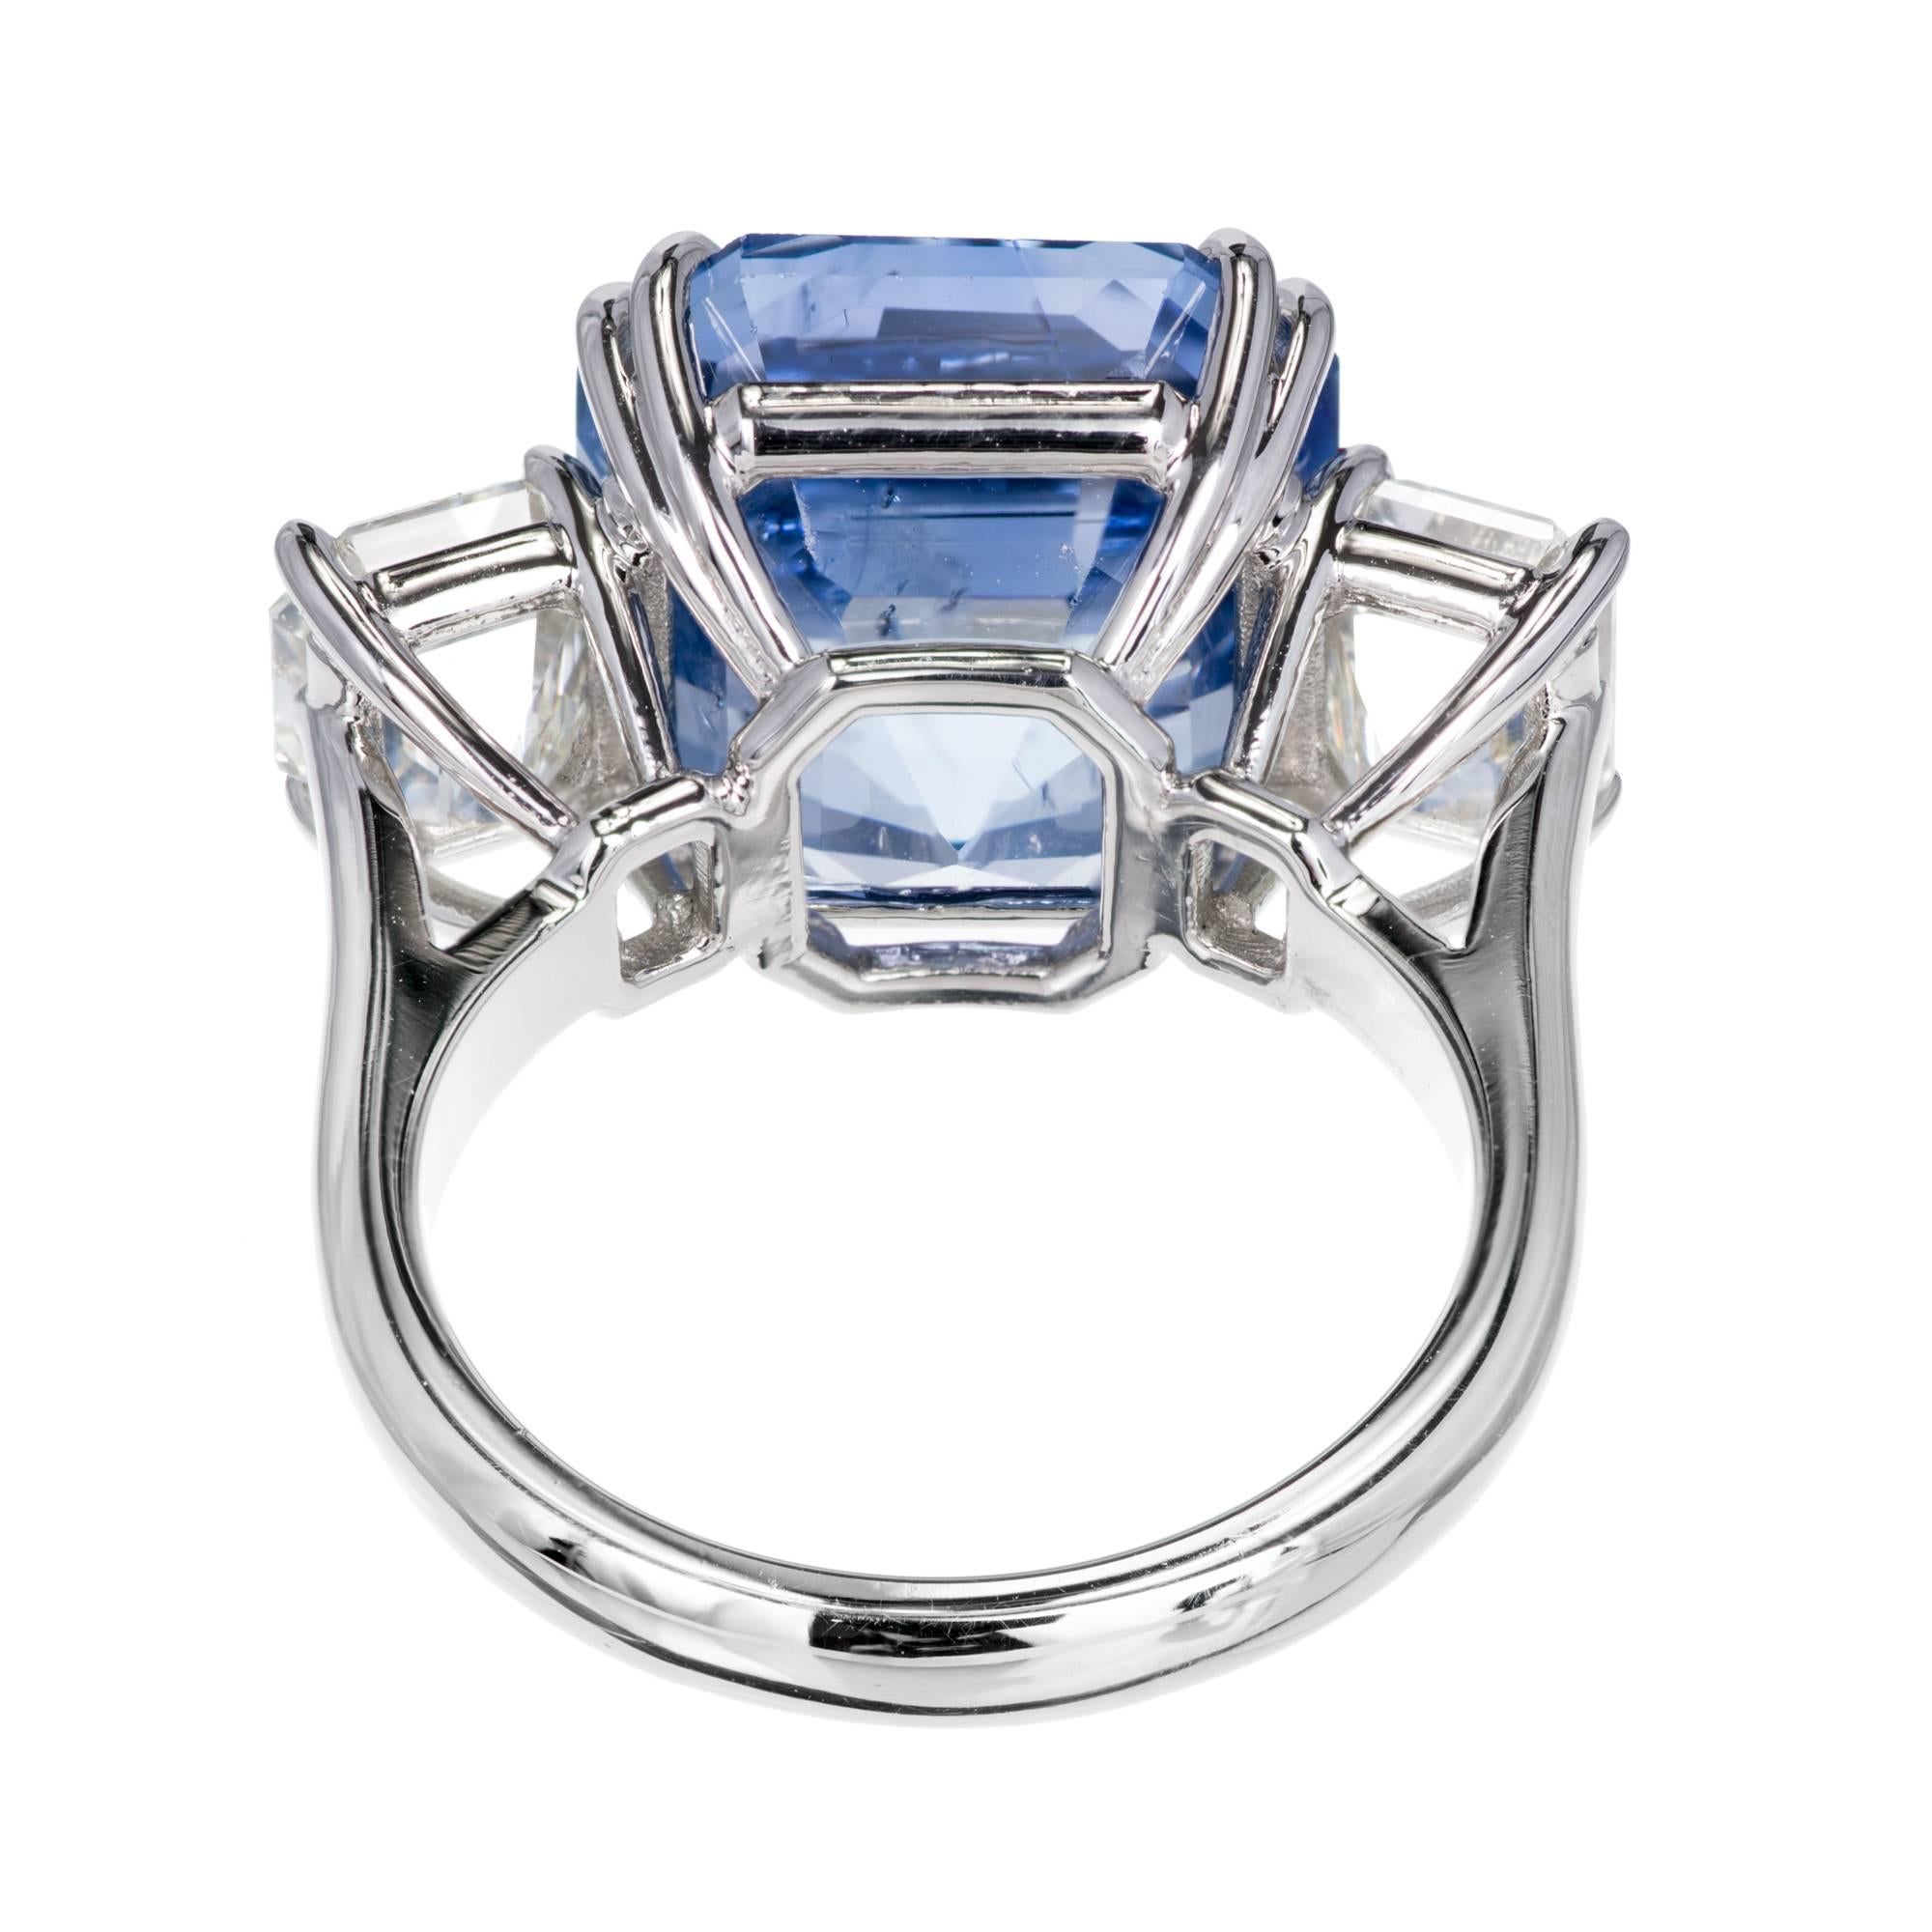 Peter Suchy bright periwinkle blue 14.92ct octagonal step cut natural no heat sapphire engagement ring with two octagonal step cut diamonds All GIA certified. Platinum handmade setting from the Peter Suchy Workshop.

1 octagonal blue sapphire 